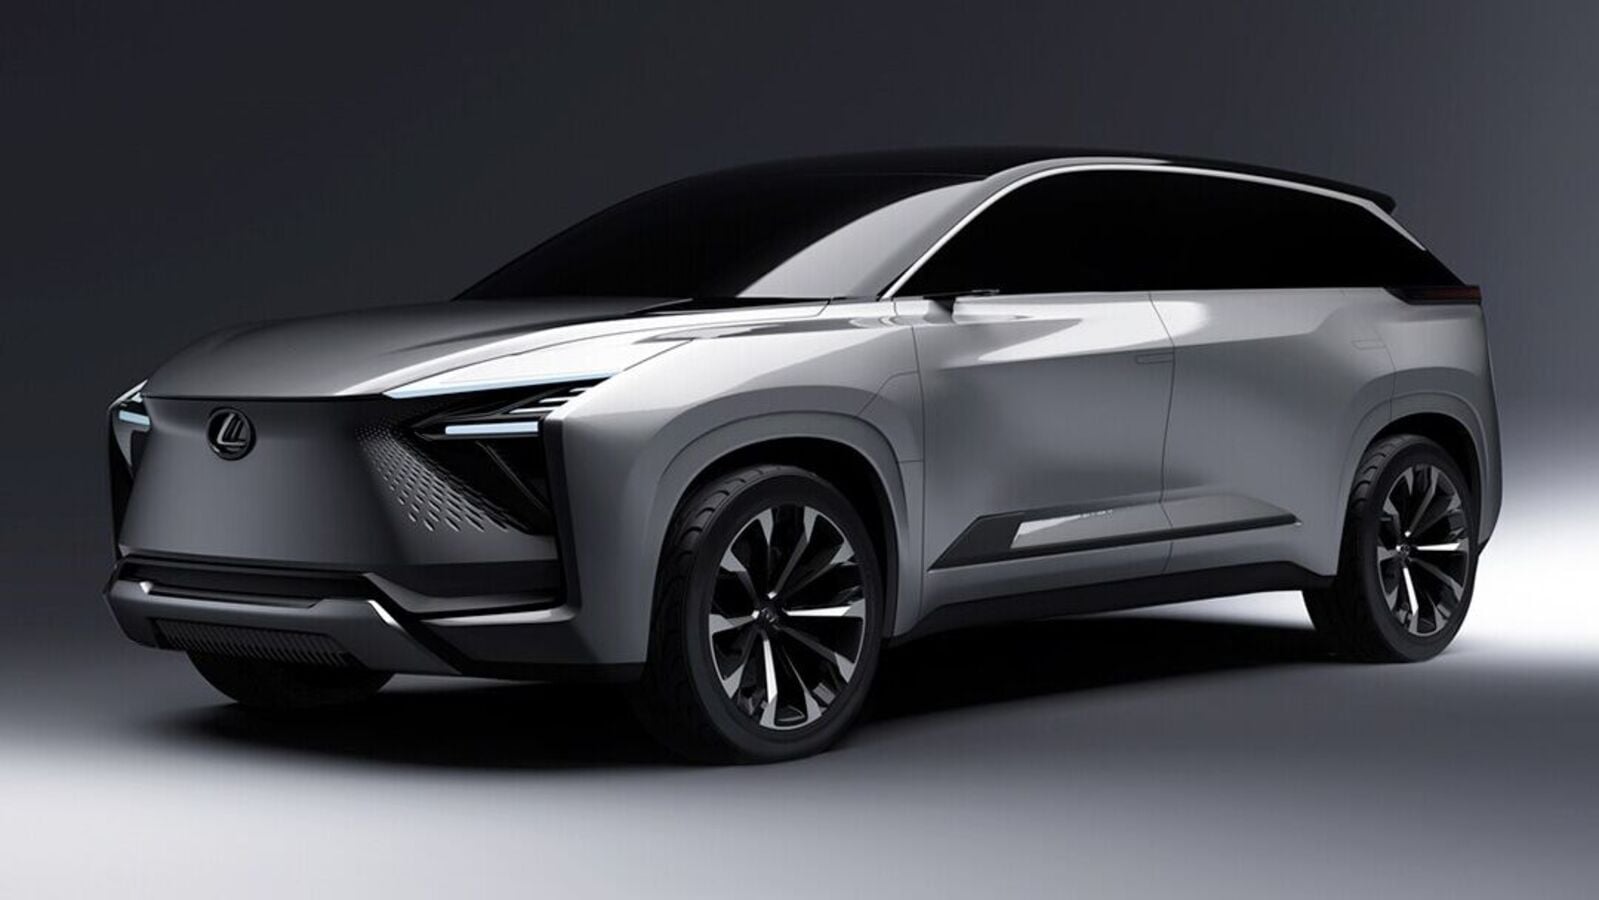 Lexus electric SUV is a dazzler on wheels. Check out new pics HT Auto